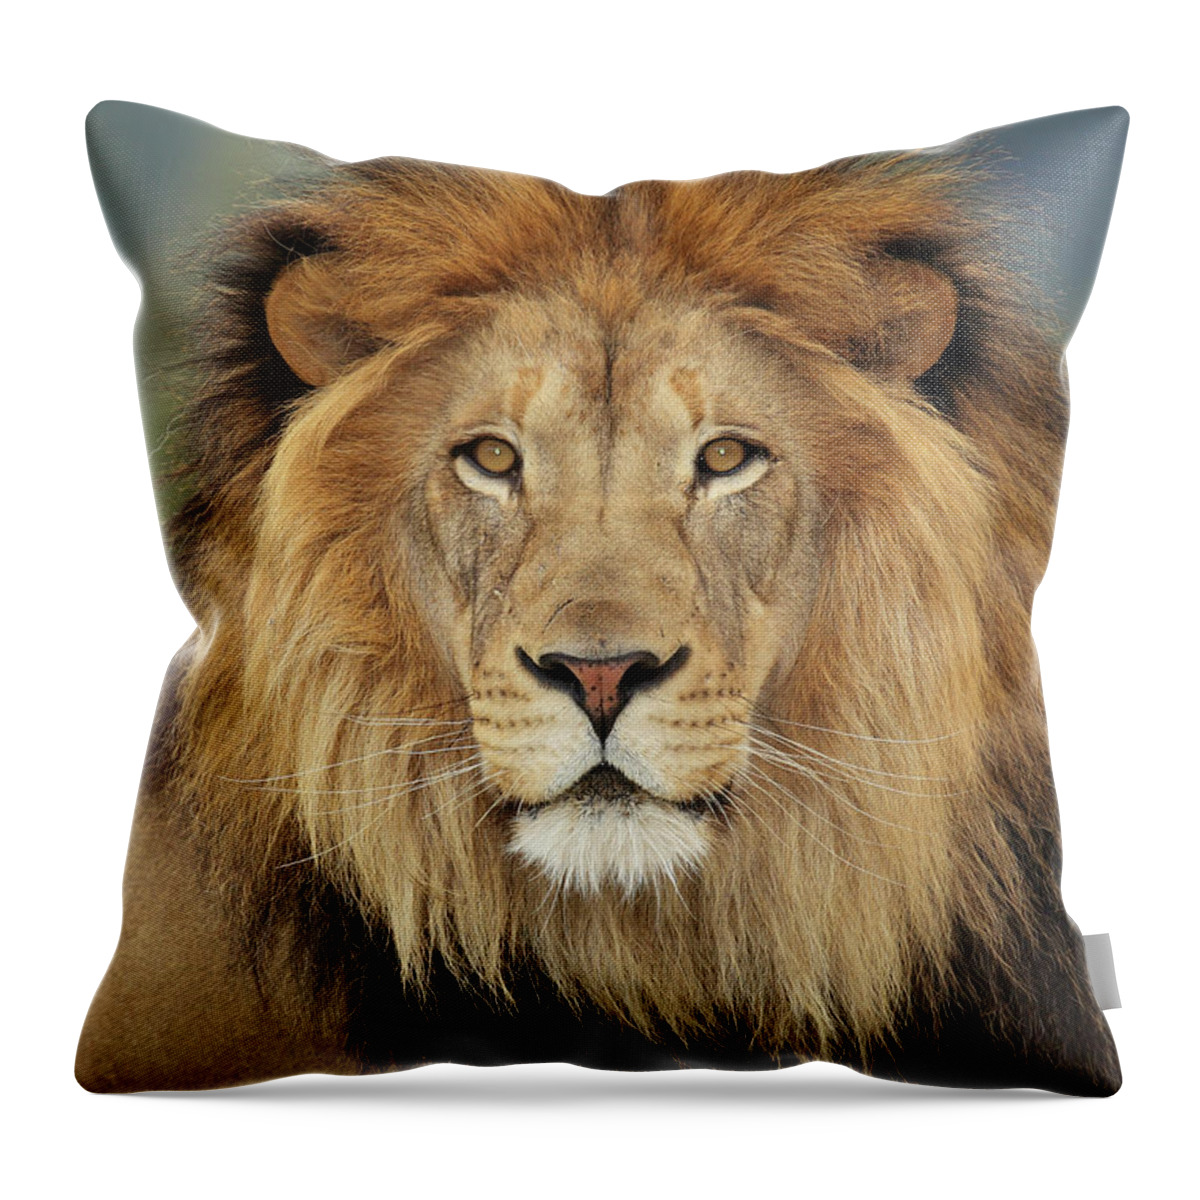 Big Cat Throw Pillow featuring the photograph Lion #1 by S. Greg Panosian